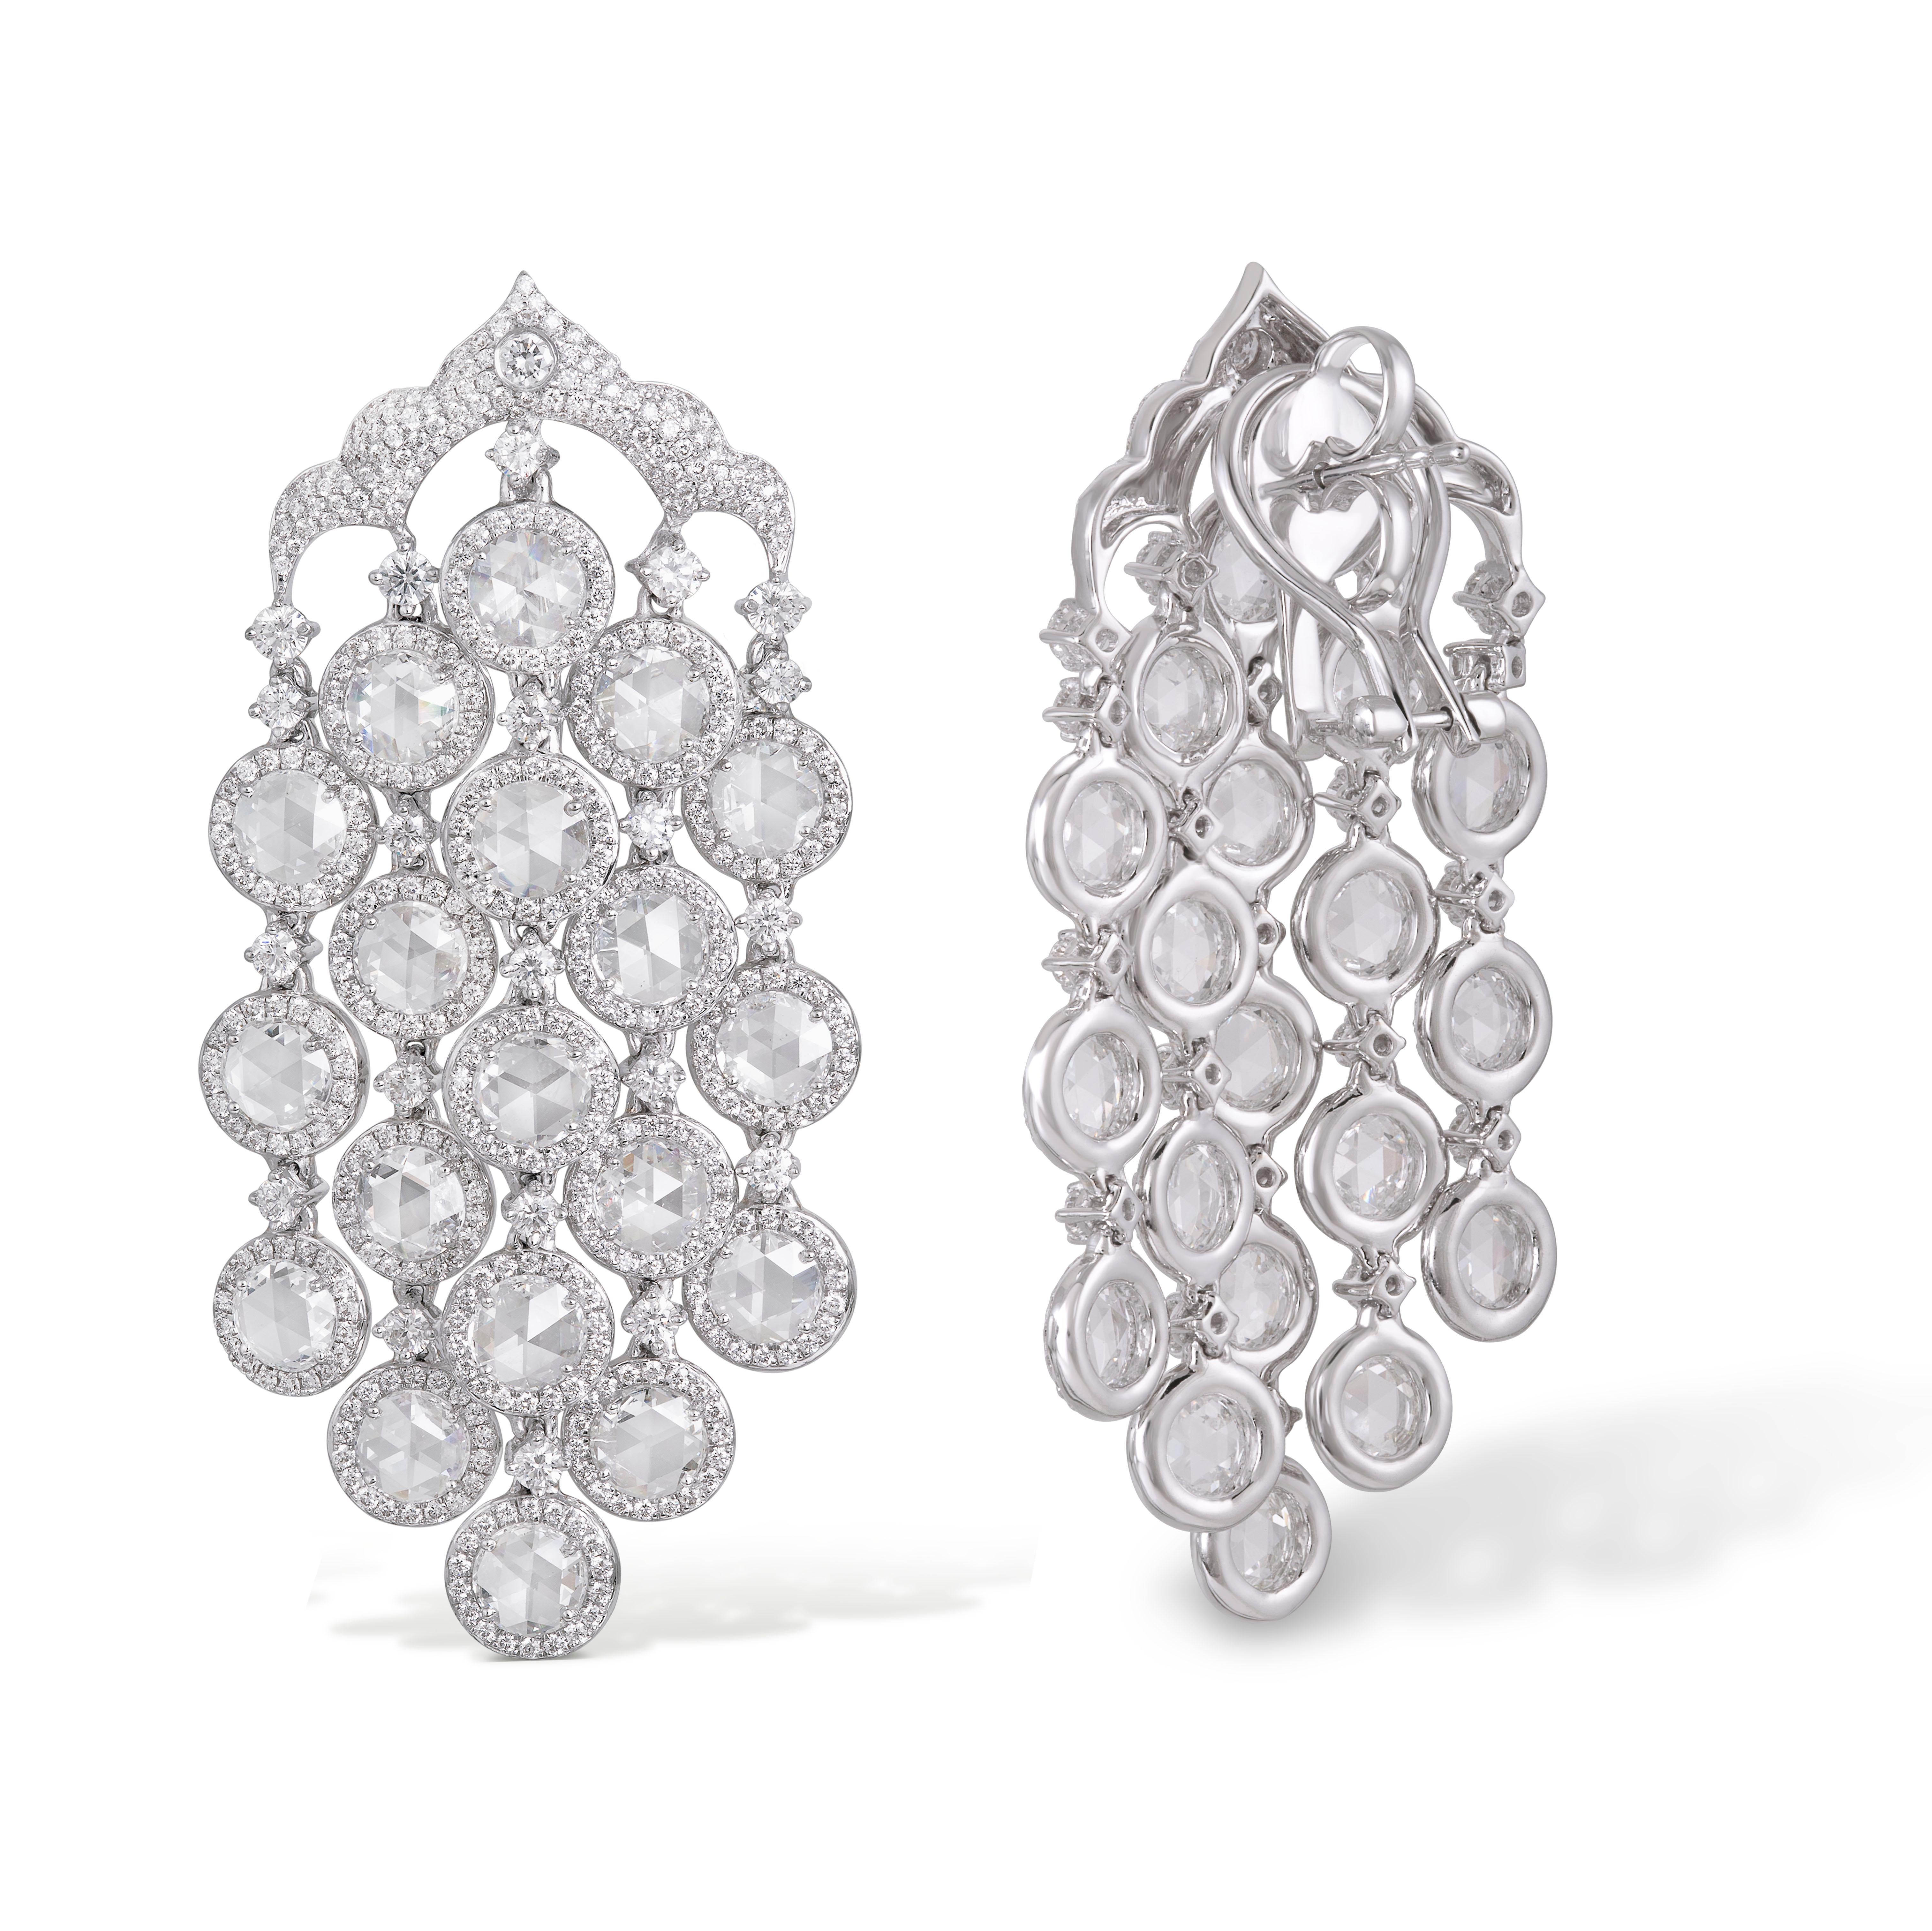 These Rarever earrings take their inspiration from the natural beauty of a waterfall. 38 round rose cut diamonds are set in a draping fashion, surrounded with halos of round brilliant cut diamonds. The subtle movement of the rose-cut diamonds